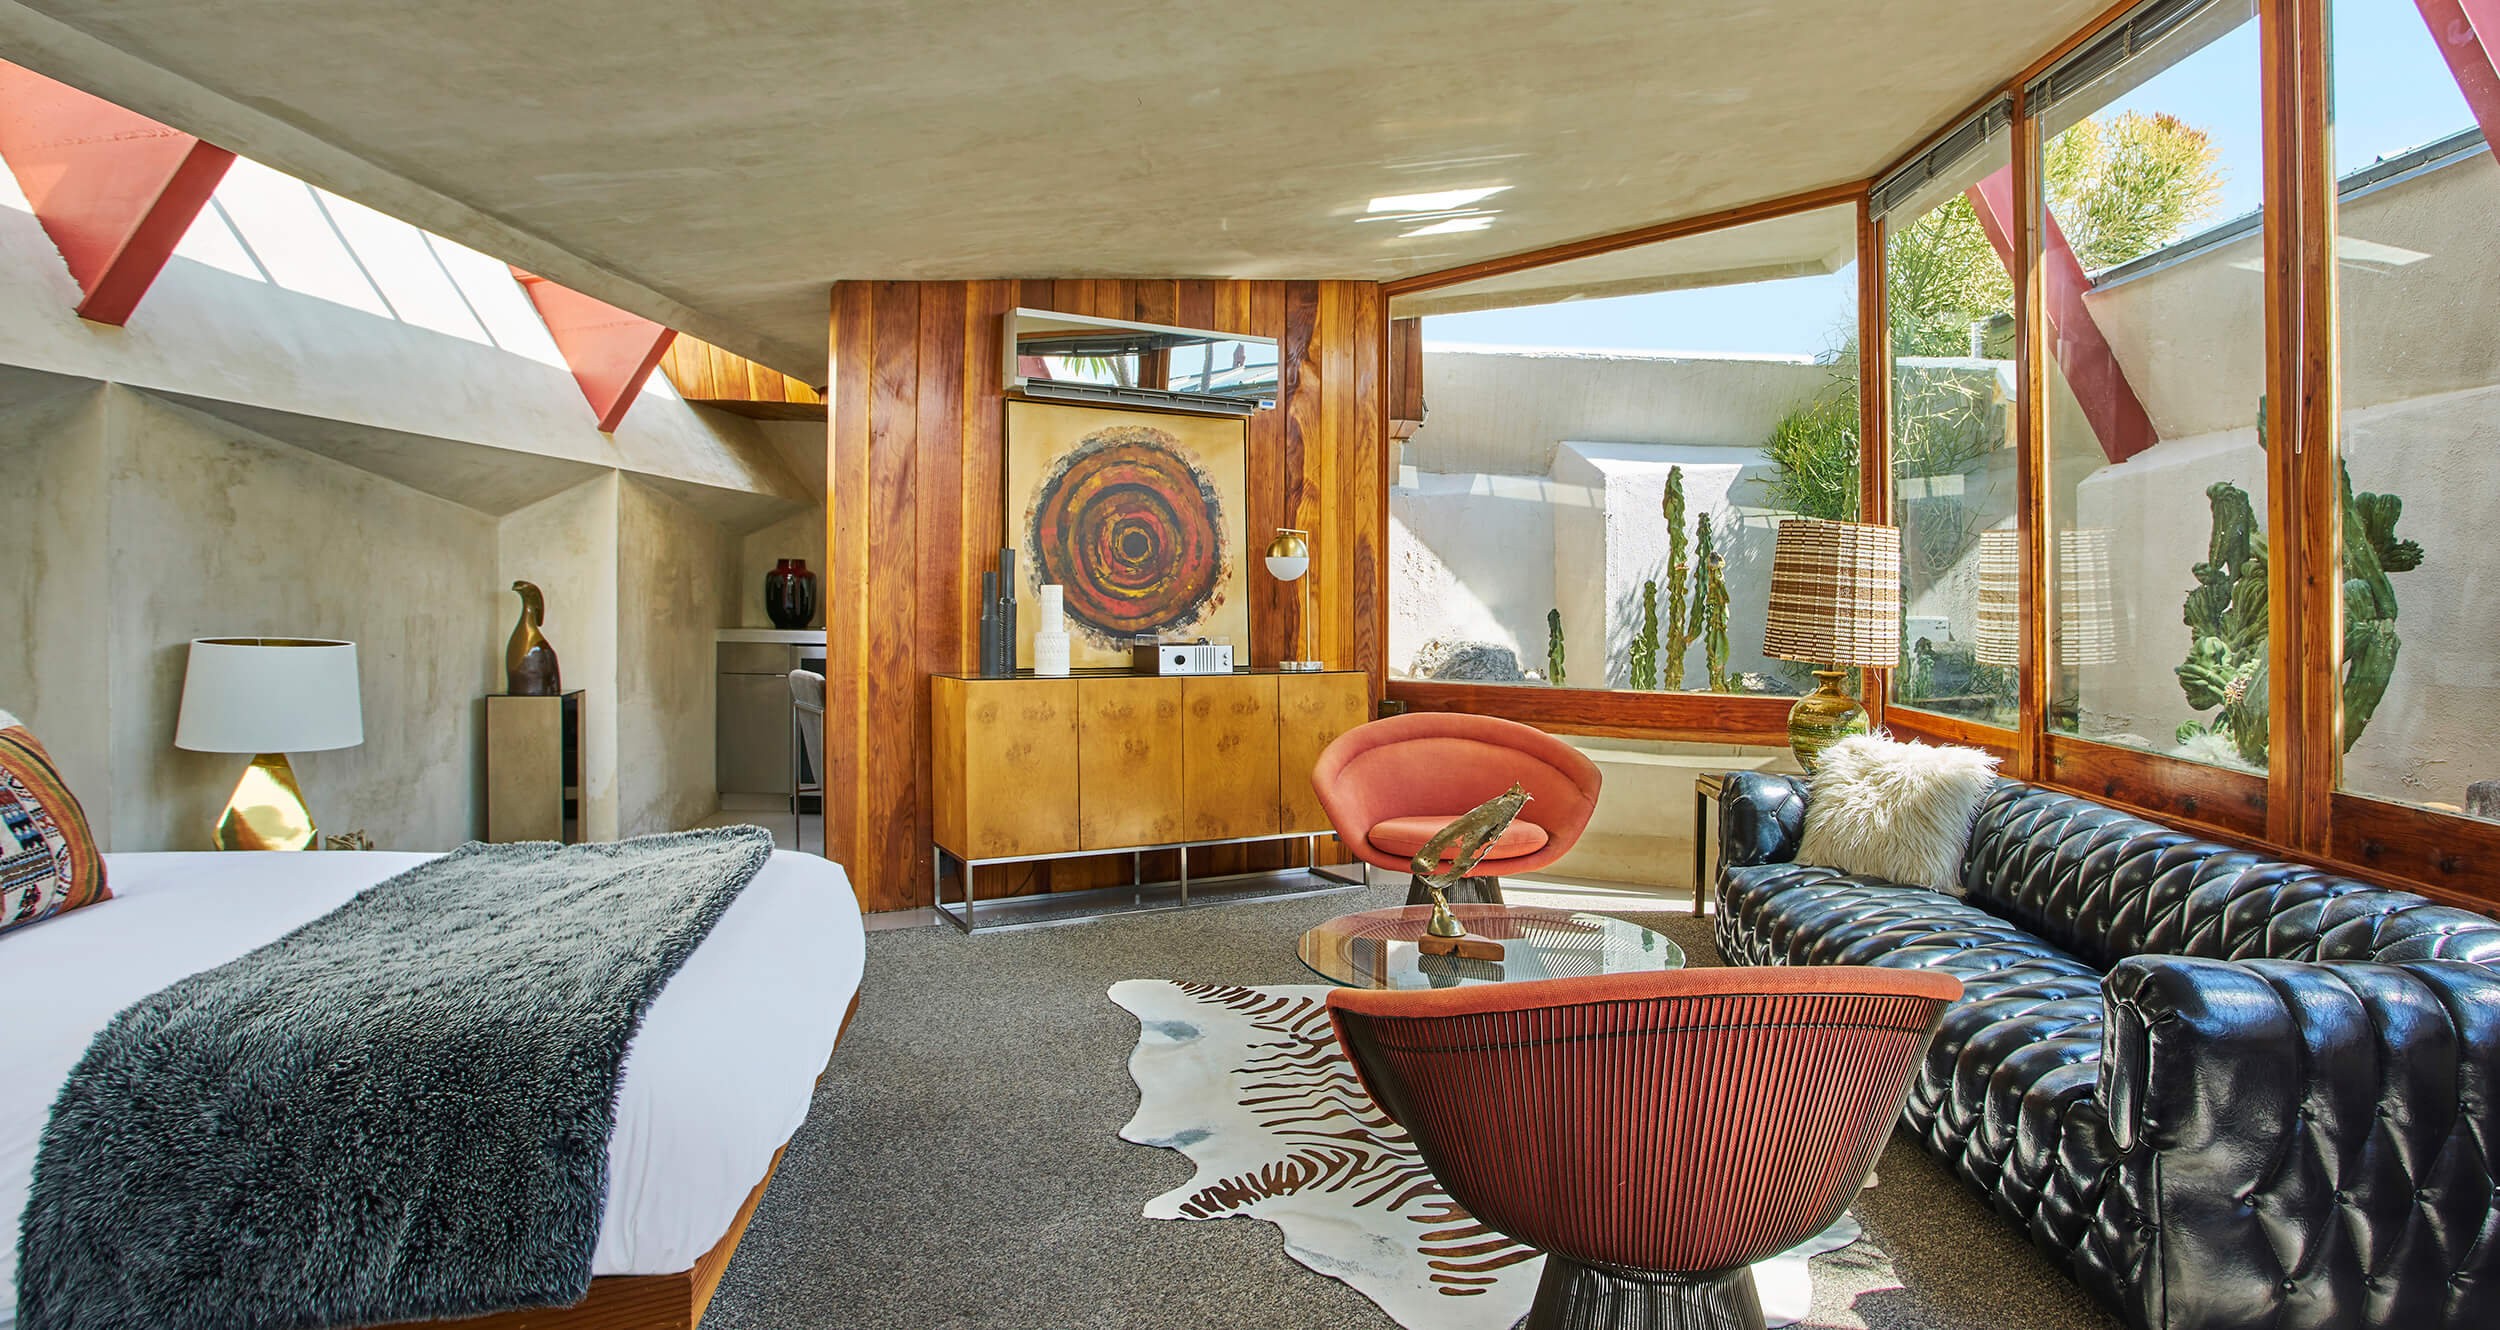 The Lautner Vacation Rental Property design by John Lautner featuring iconic mid-century modern style architecture, furniture, and interior design.